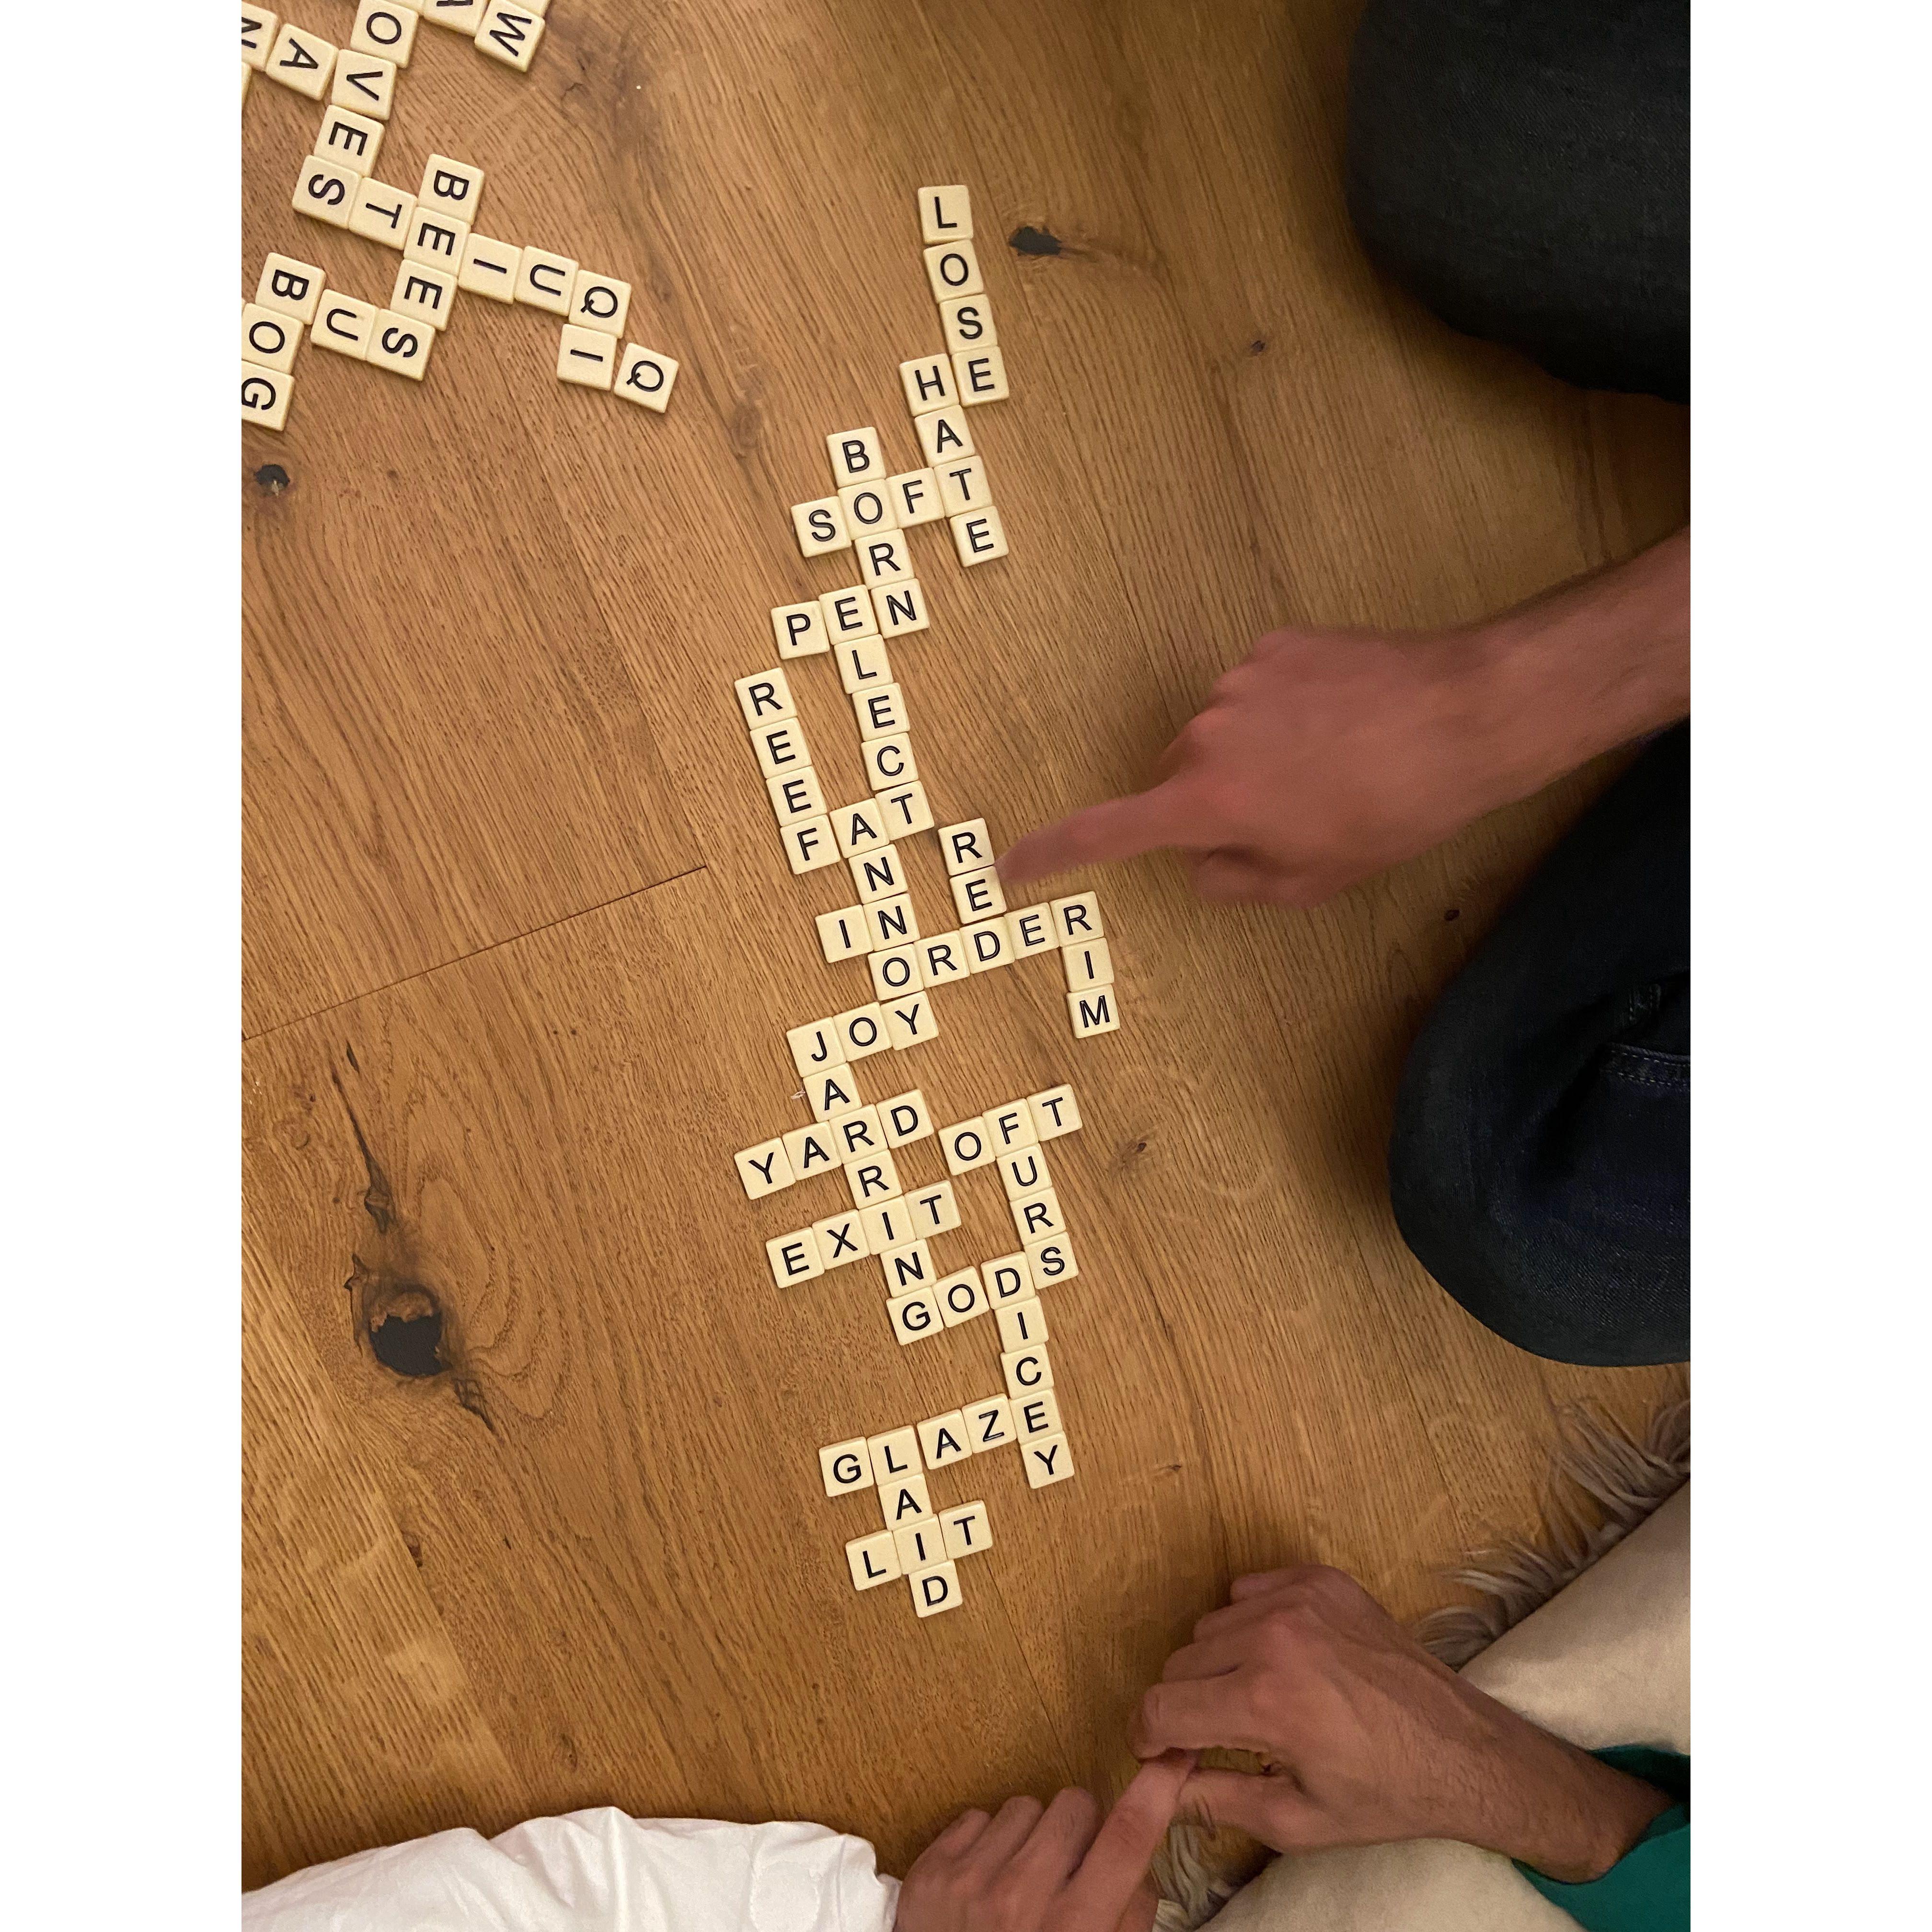 Playing one of our favorites - bananagrams. Now the question is.. who won this round?